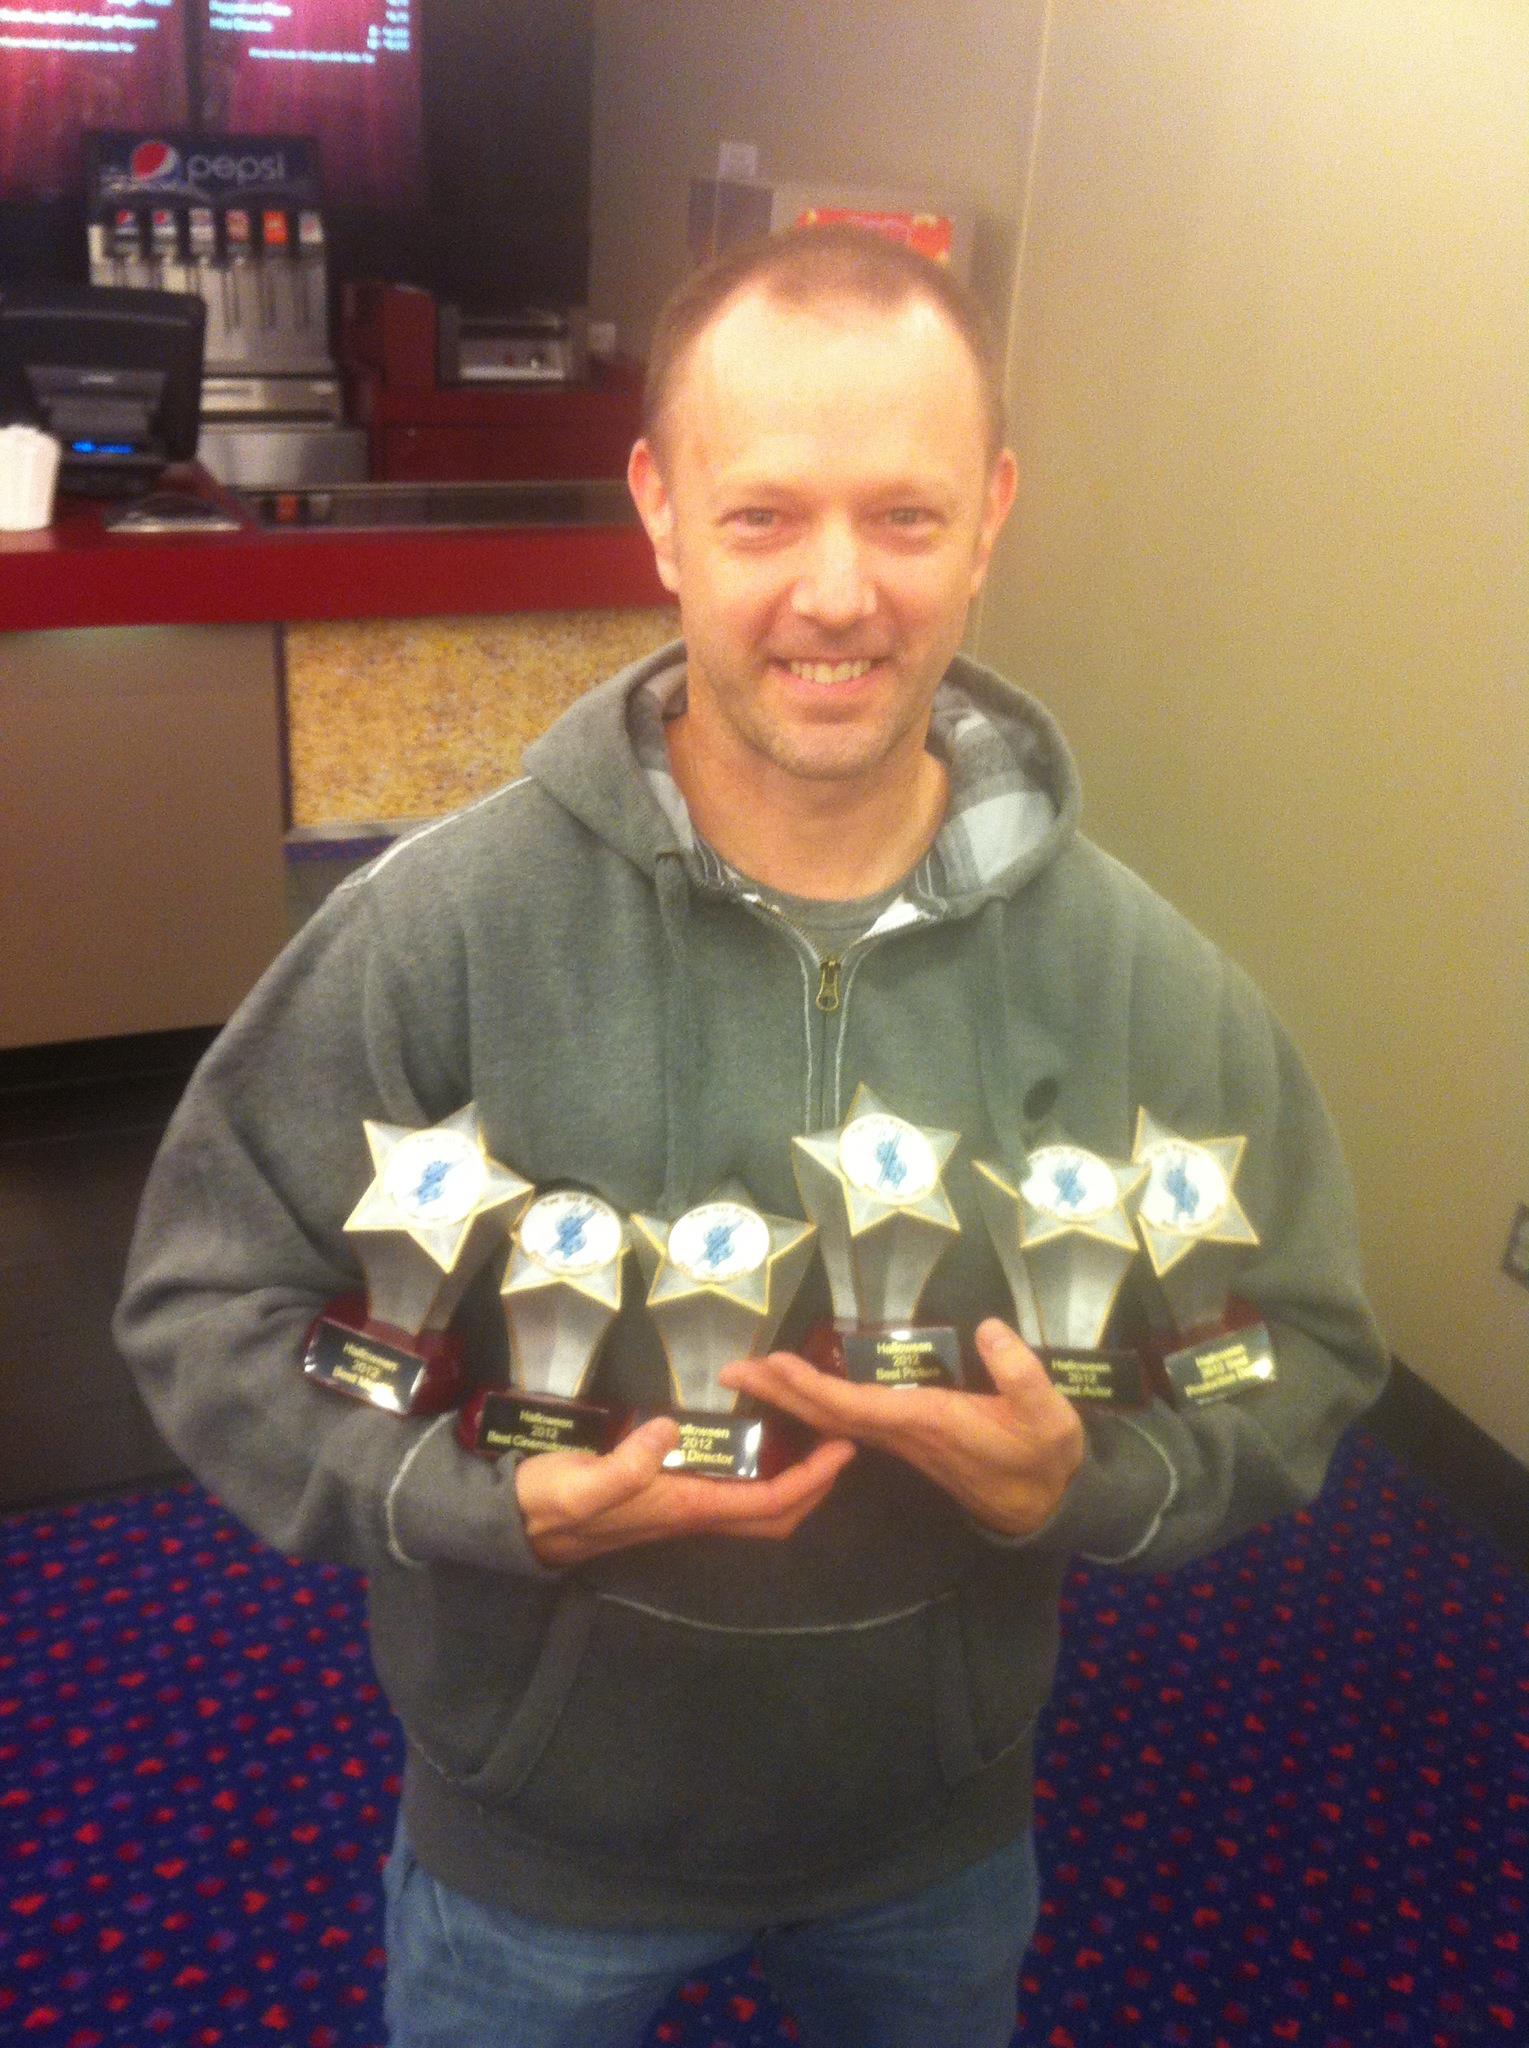 Chars with his awards for 